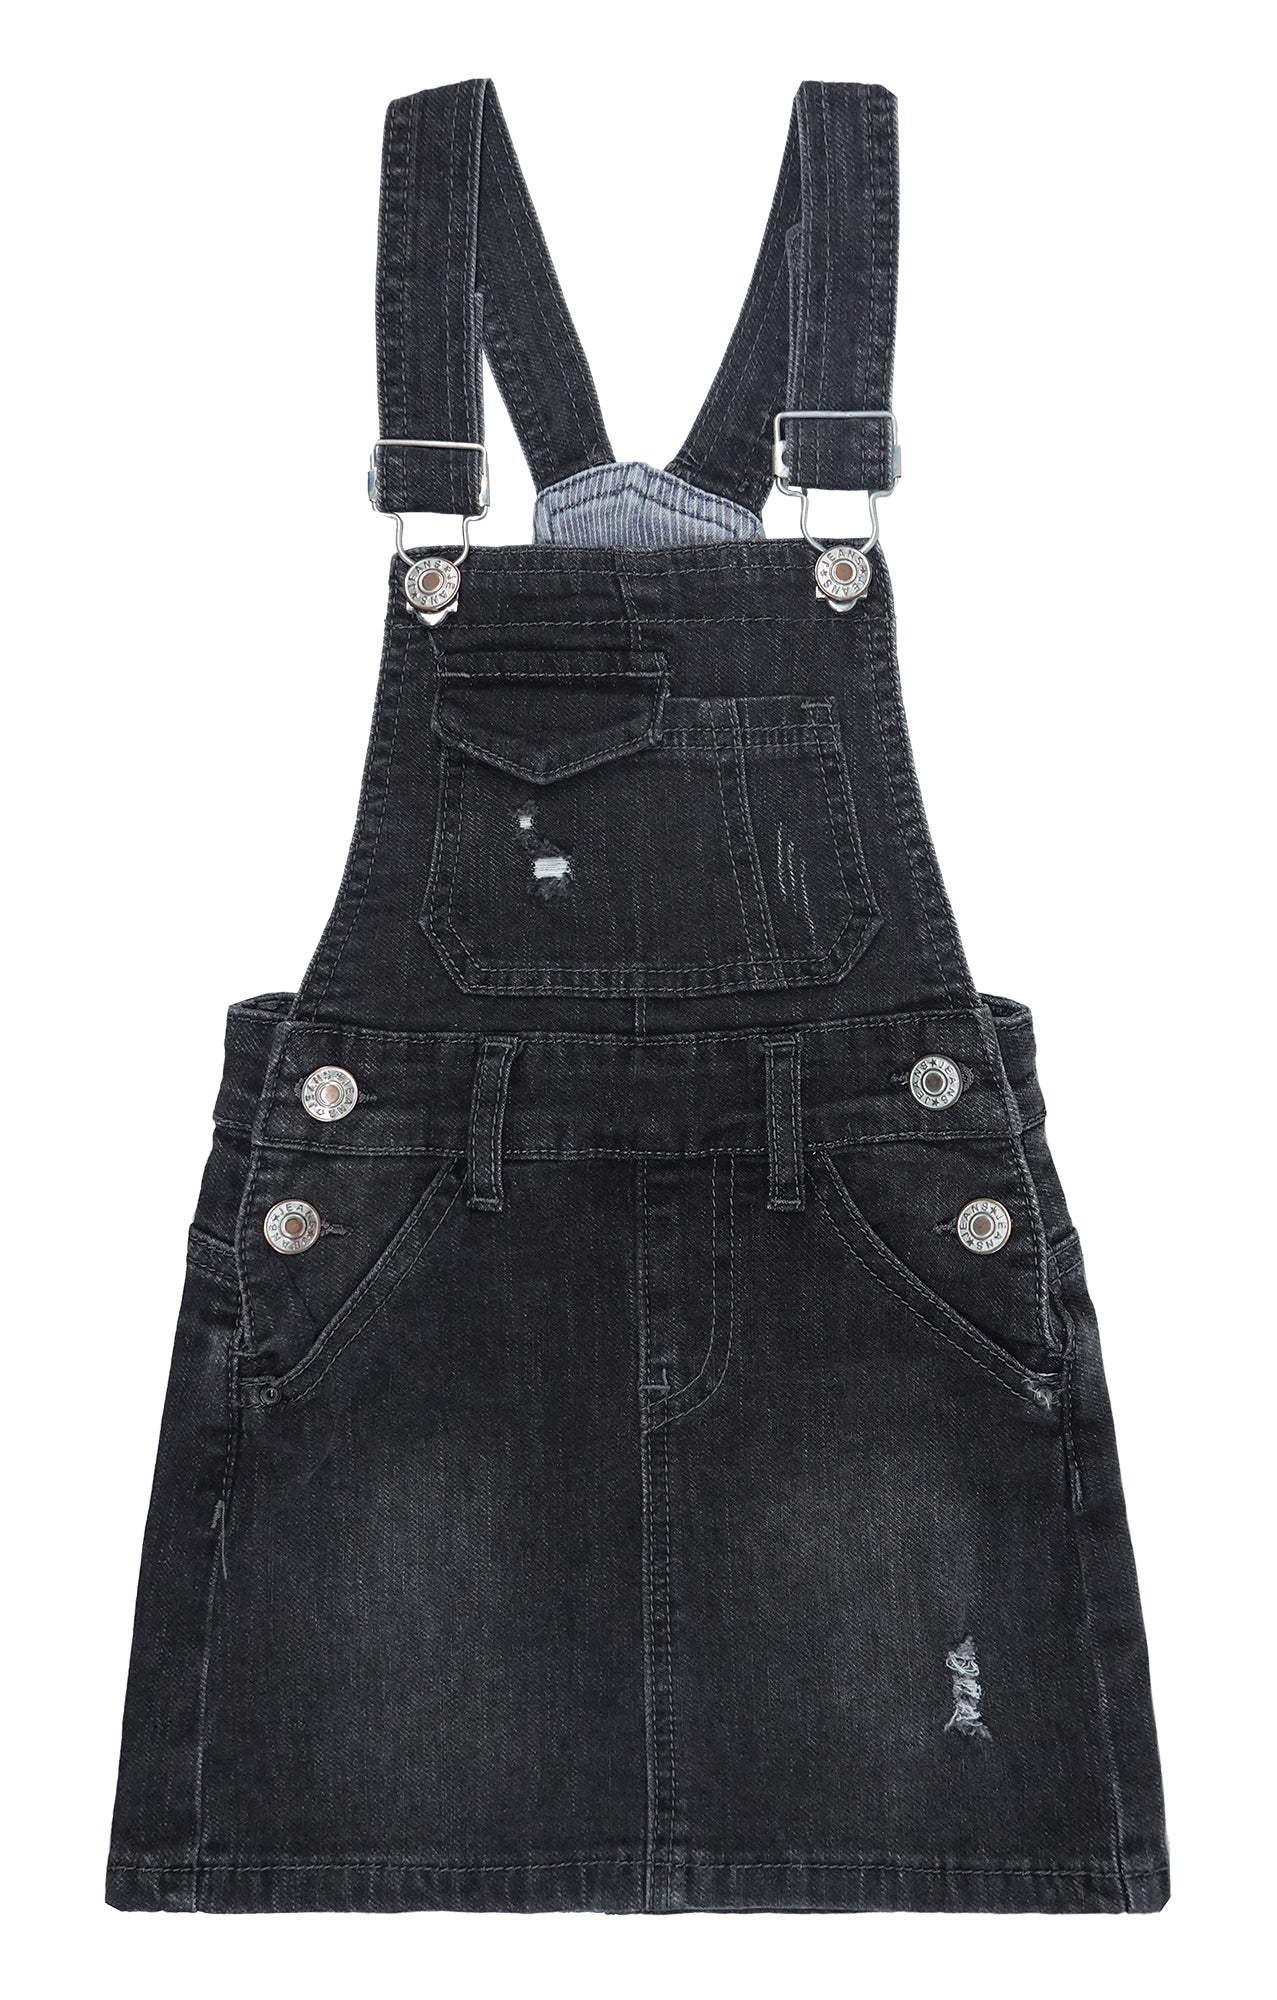 Girls Denim Skirts,Baby Little Big Girls Ripped Soft Stretchy Jeans Overall Dress